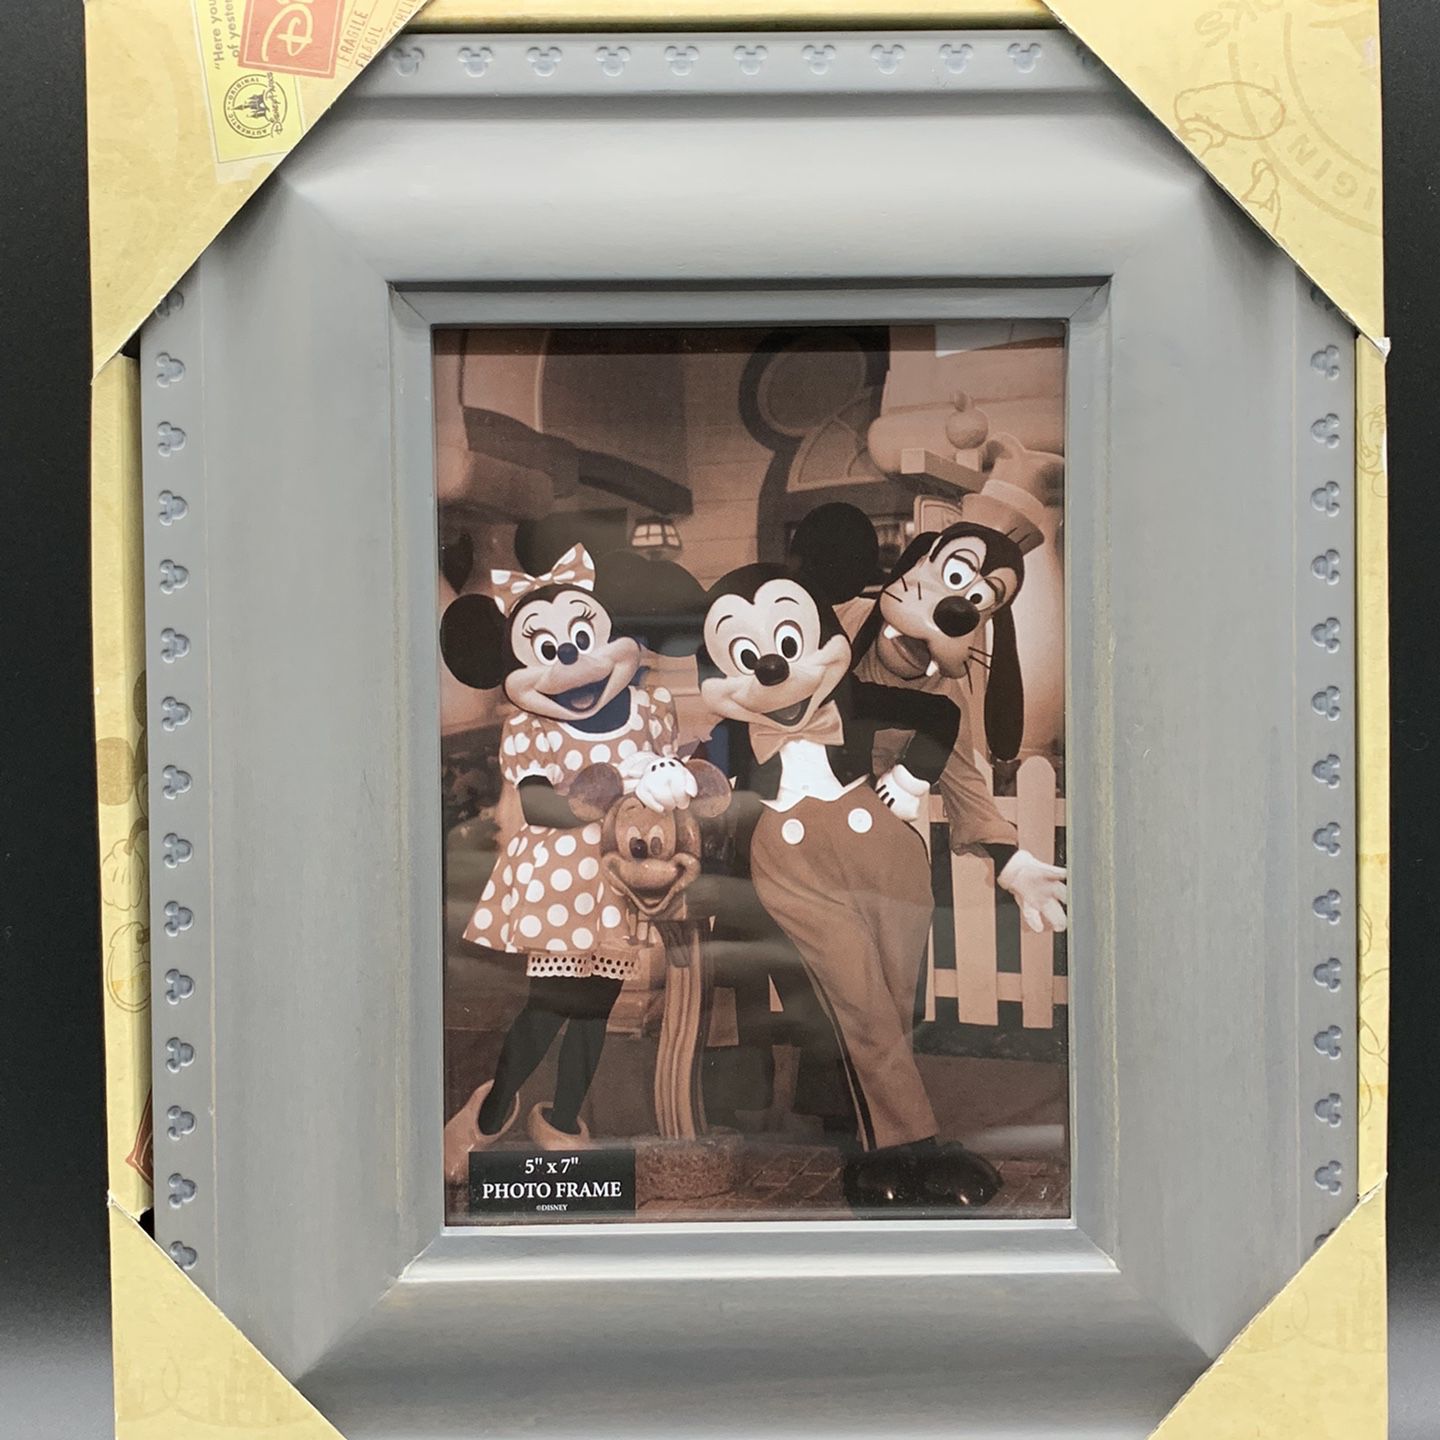 Custom Personalized Disney Love Picture Frame to Celebrate Your Vacation,  Mickey Picture Fame, Disney Home Decor Decorations Wedding Gifts 